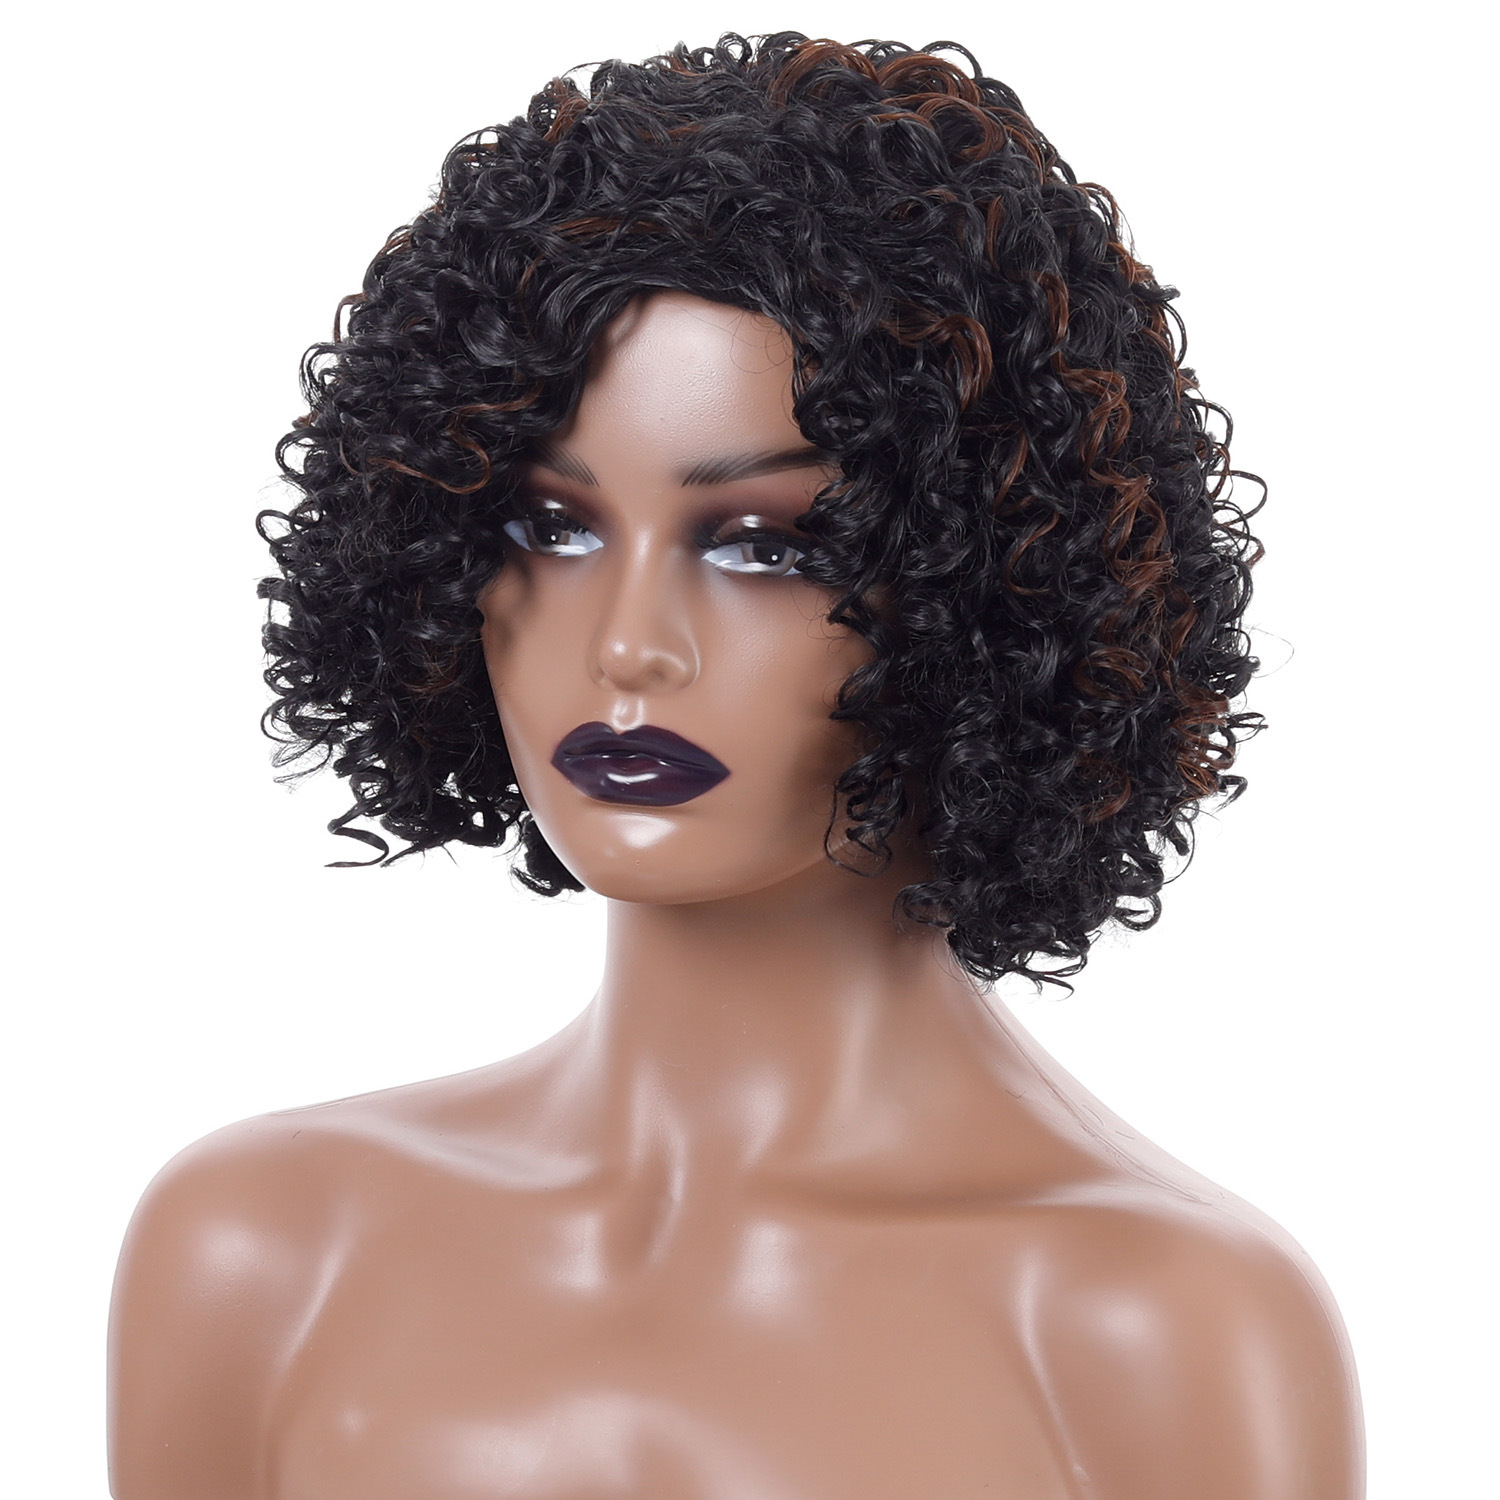 Synthetic wig with short curly hair in black highlight brown color, includes women's afro small curly wig headgear